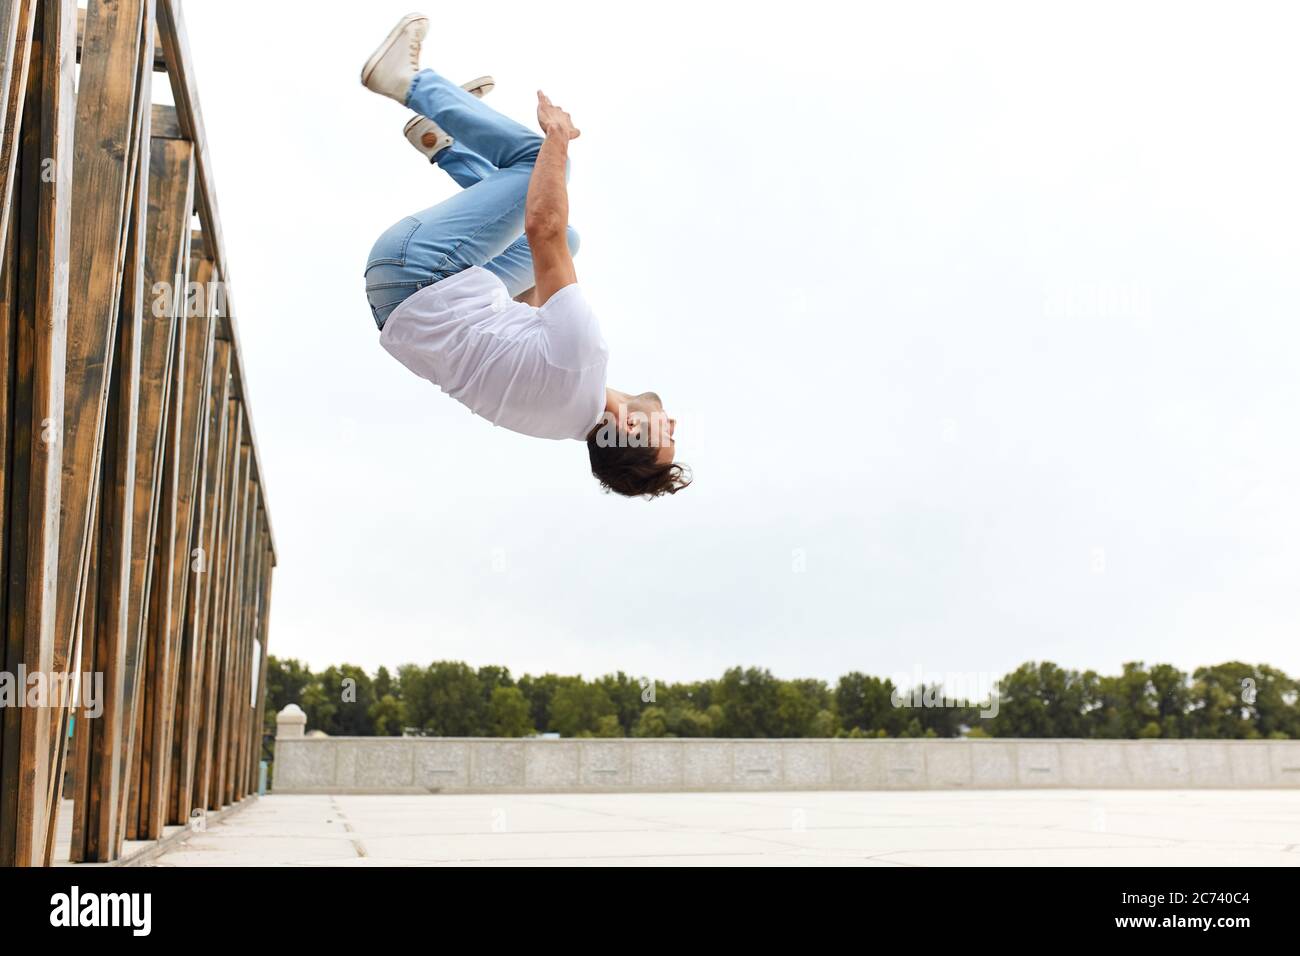 Backflip High Resolution Stock Photography and Images - Alamy